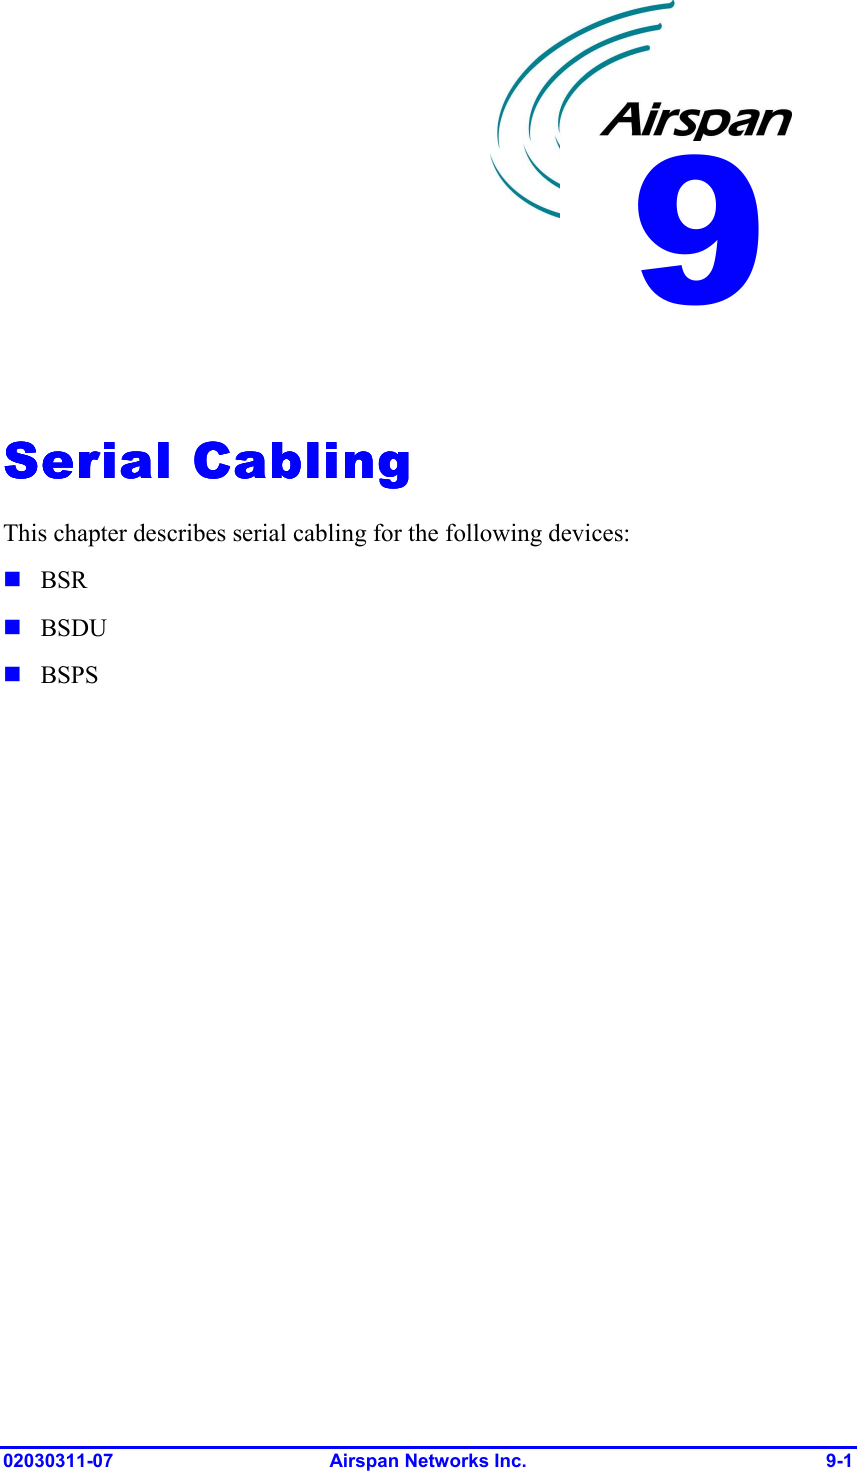  02030311-07 Airspan Networks Inc.  9-1   Serial CablingSerial CablingSerial CablingSerial Cabling    This chapter describes serial cabling for the following devices: ! BSR ! BSDU ! BSPS 9 